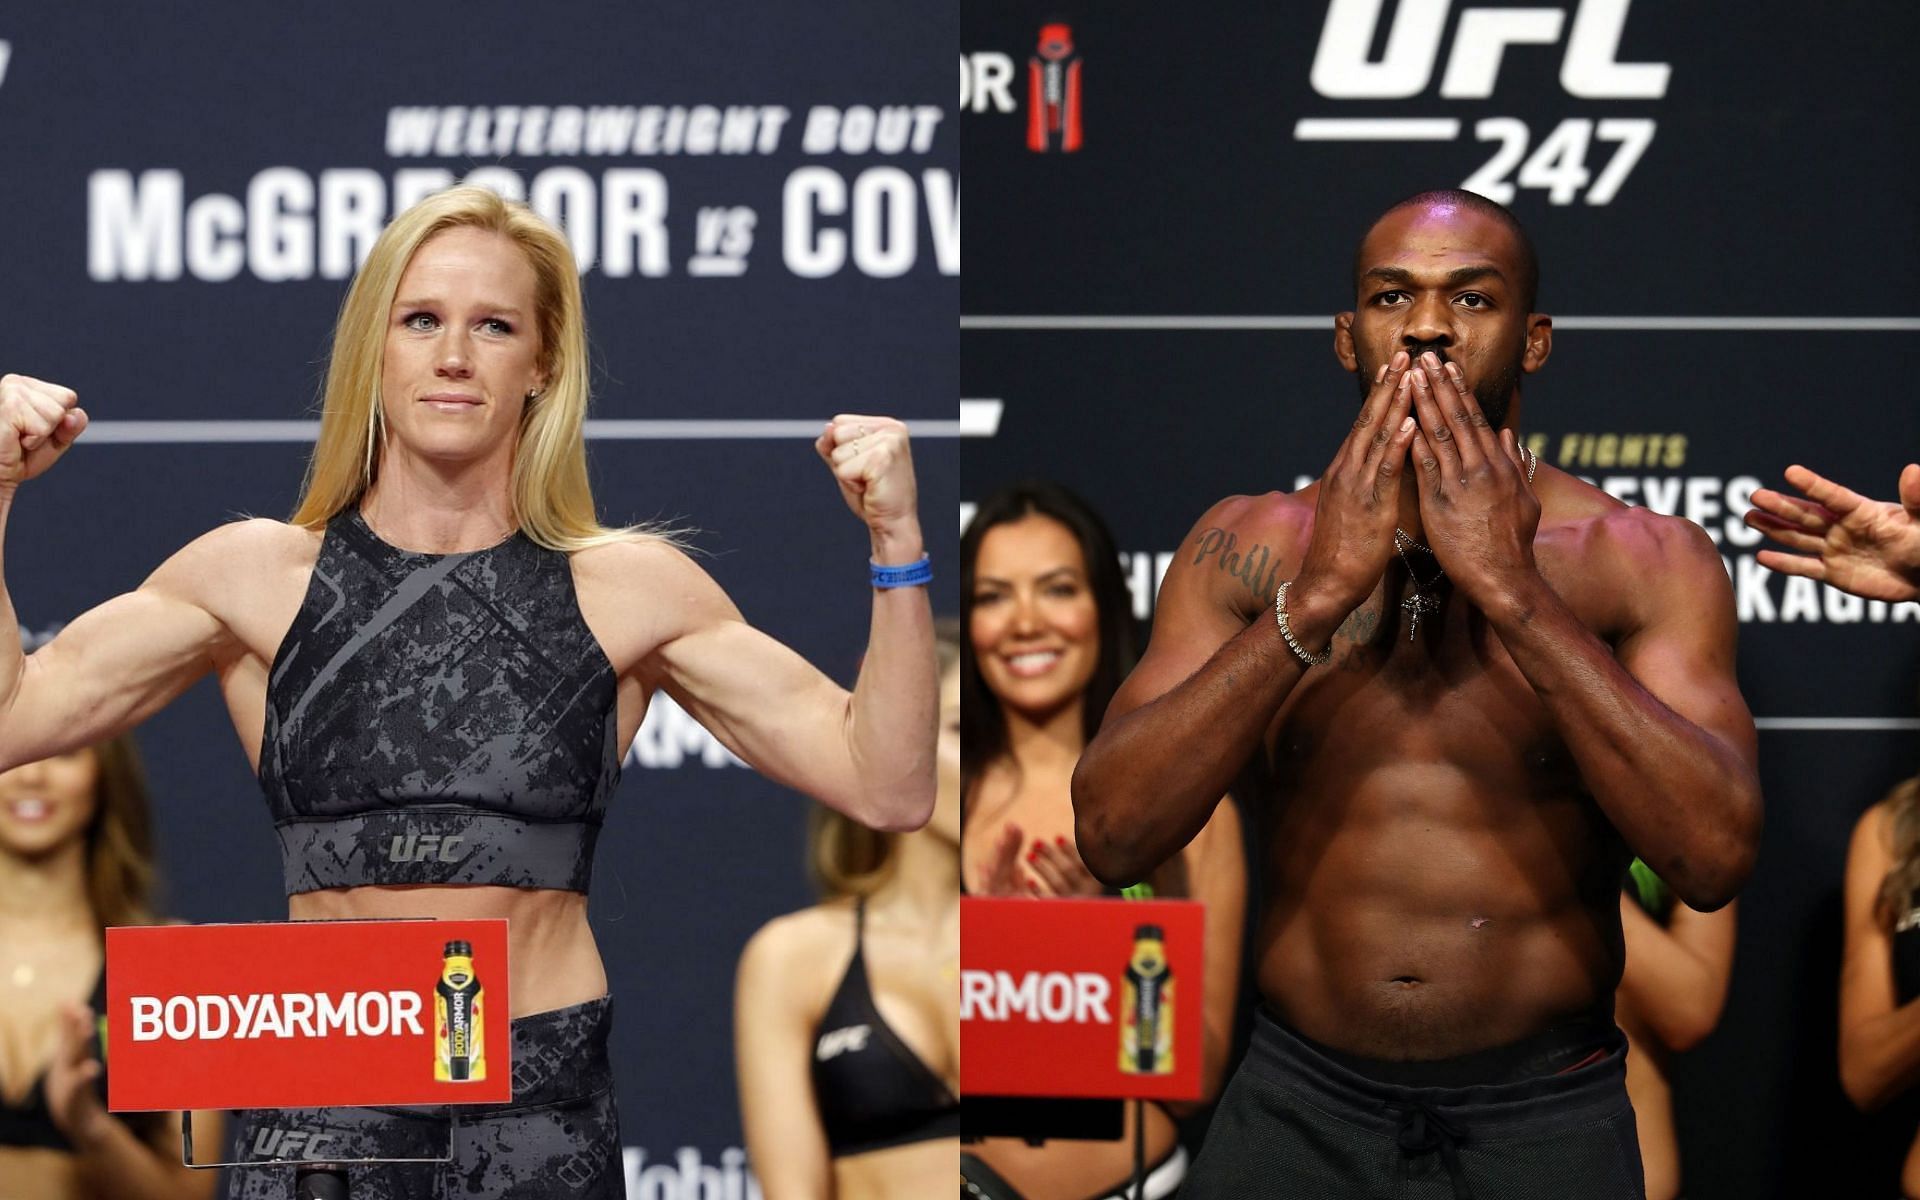 Jon Jones has congratulated Holly Holm after it was announced she will be inducted into the International Boxing Hall of Fame